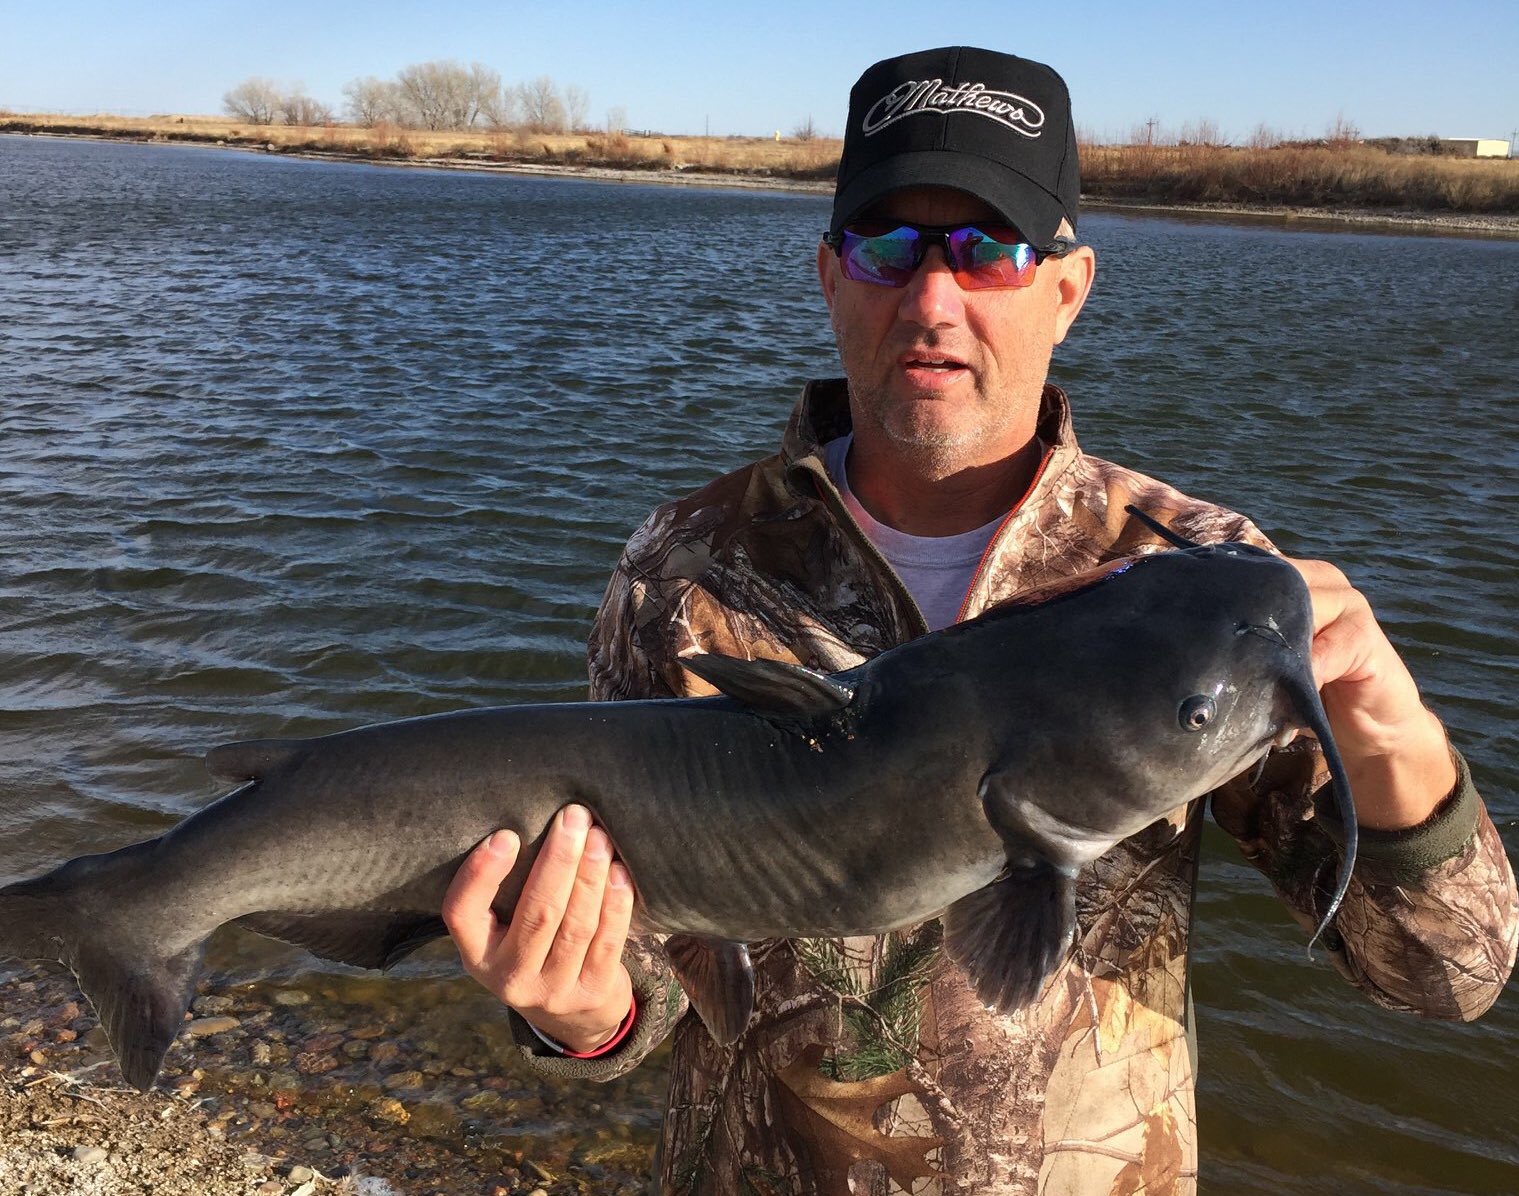 St. Croix Rods on X: “I caught this catfish with my St. Croix Trout Series  rod on old 4# test line. He sure gave this rod a workout. Who said it was